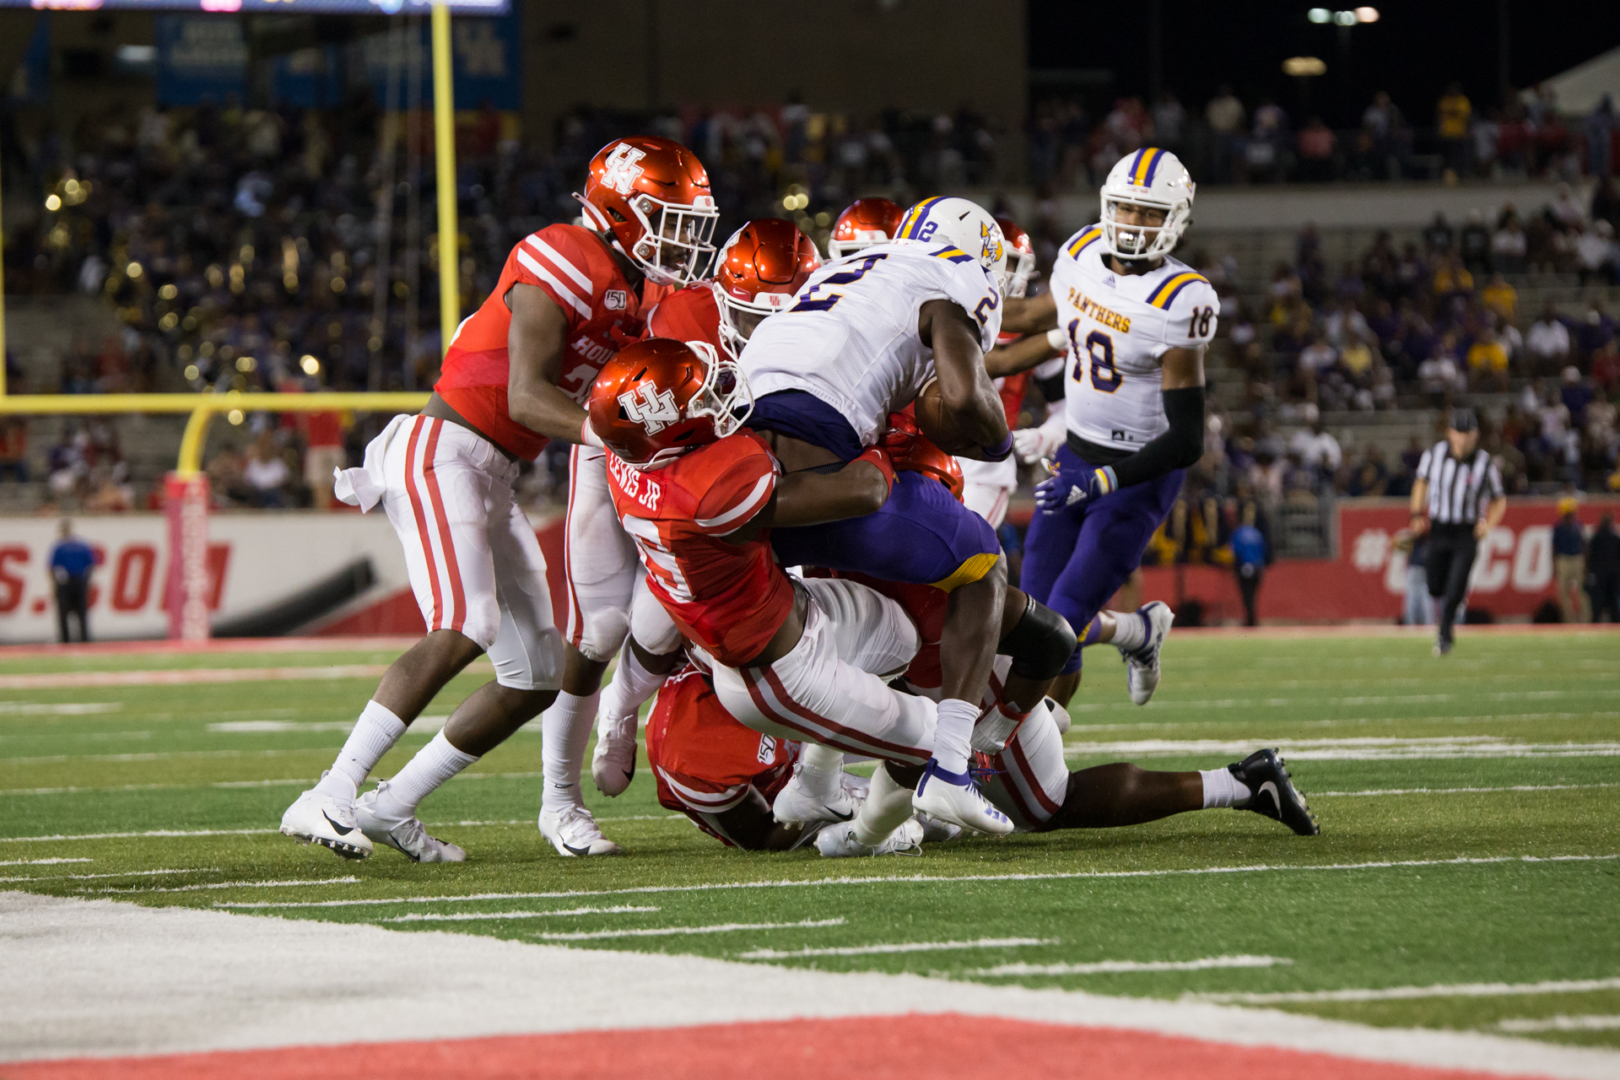 UH football defenders surround a Prairie View A&M offensive player during a game in the 2019 season at TDECU Stadium. This contest was the Cougars' home opener a year ago. Houston's 2020 home opener will be against Tulane after the numerous cancellation to start the campaign. | Trevor Nolley/The Cougar